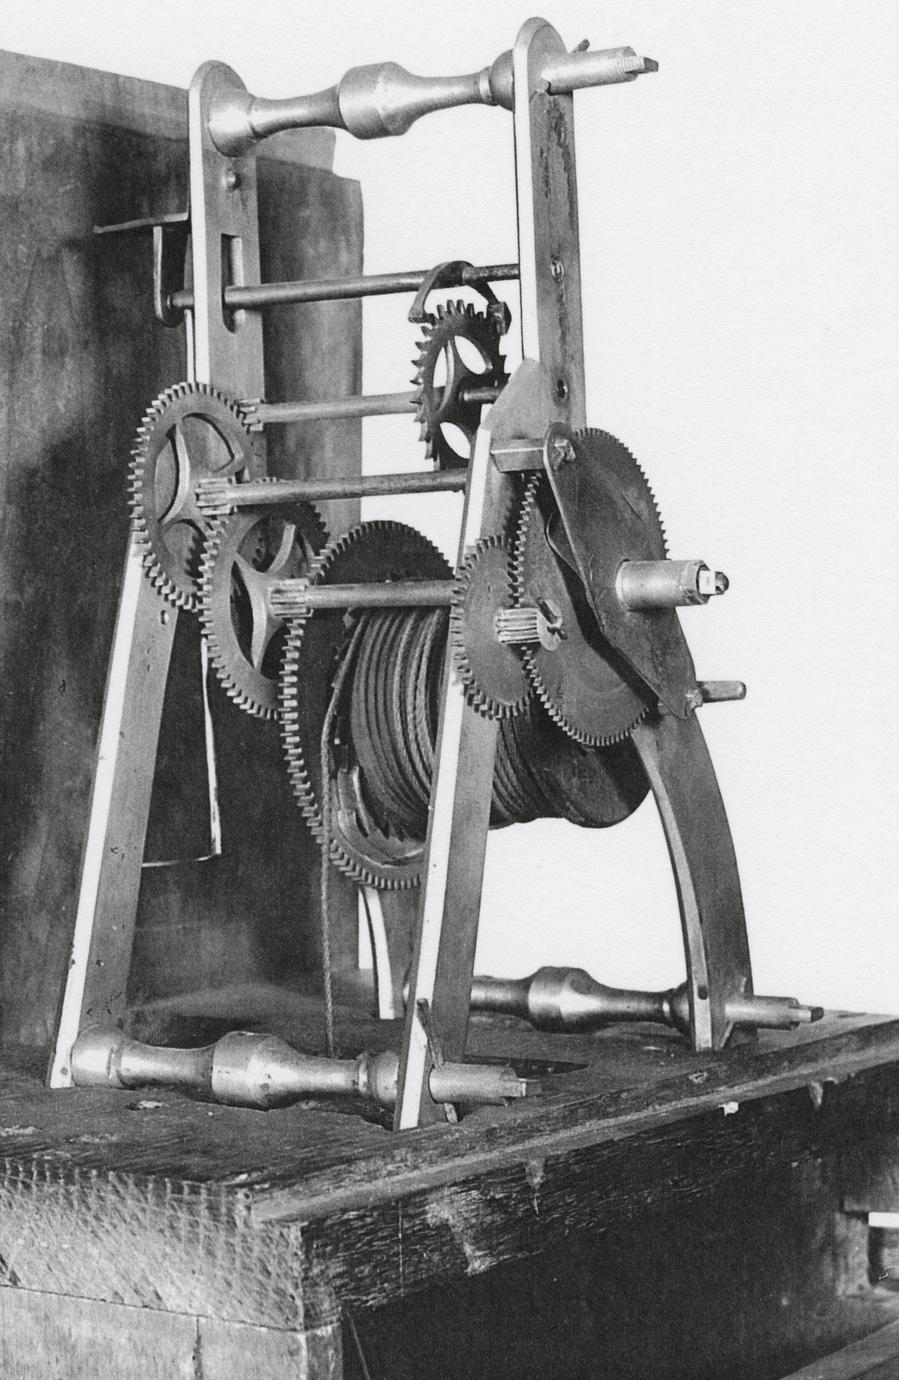 Black and white photograph of a tall-case clock gear system.